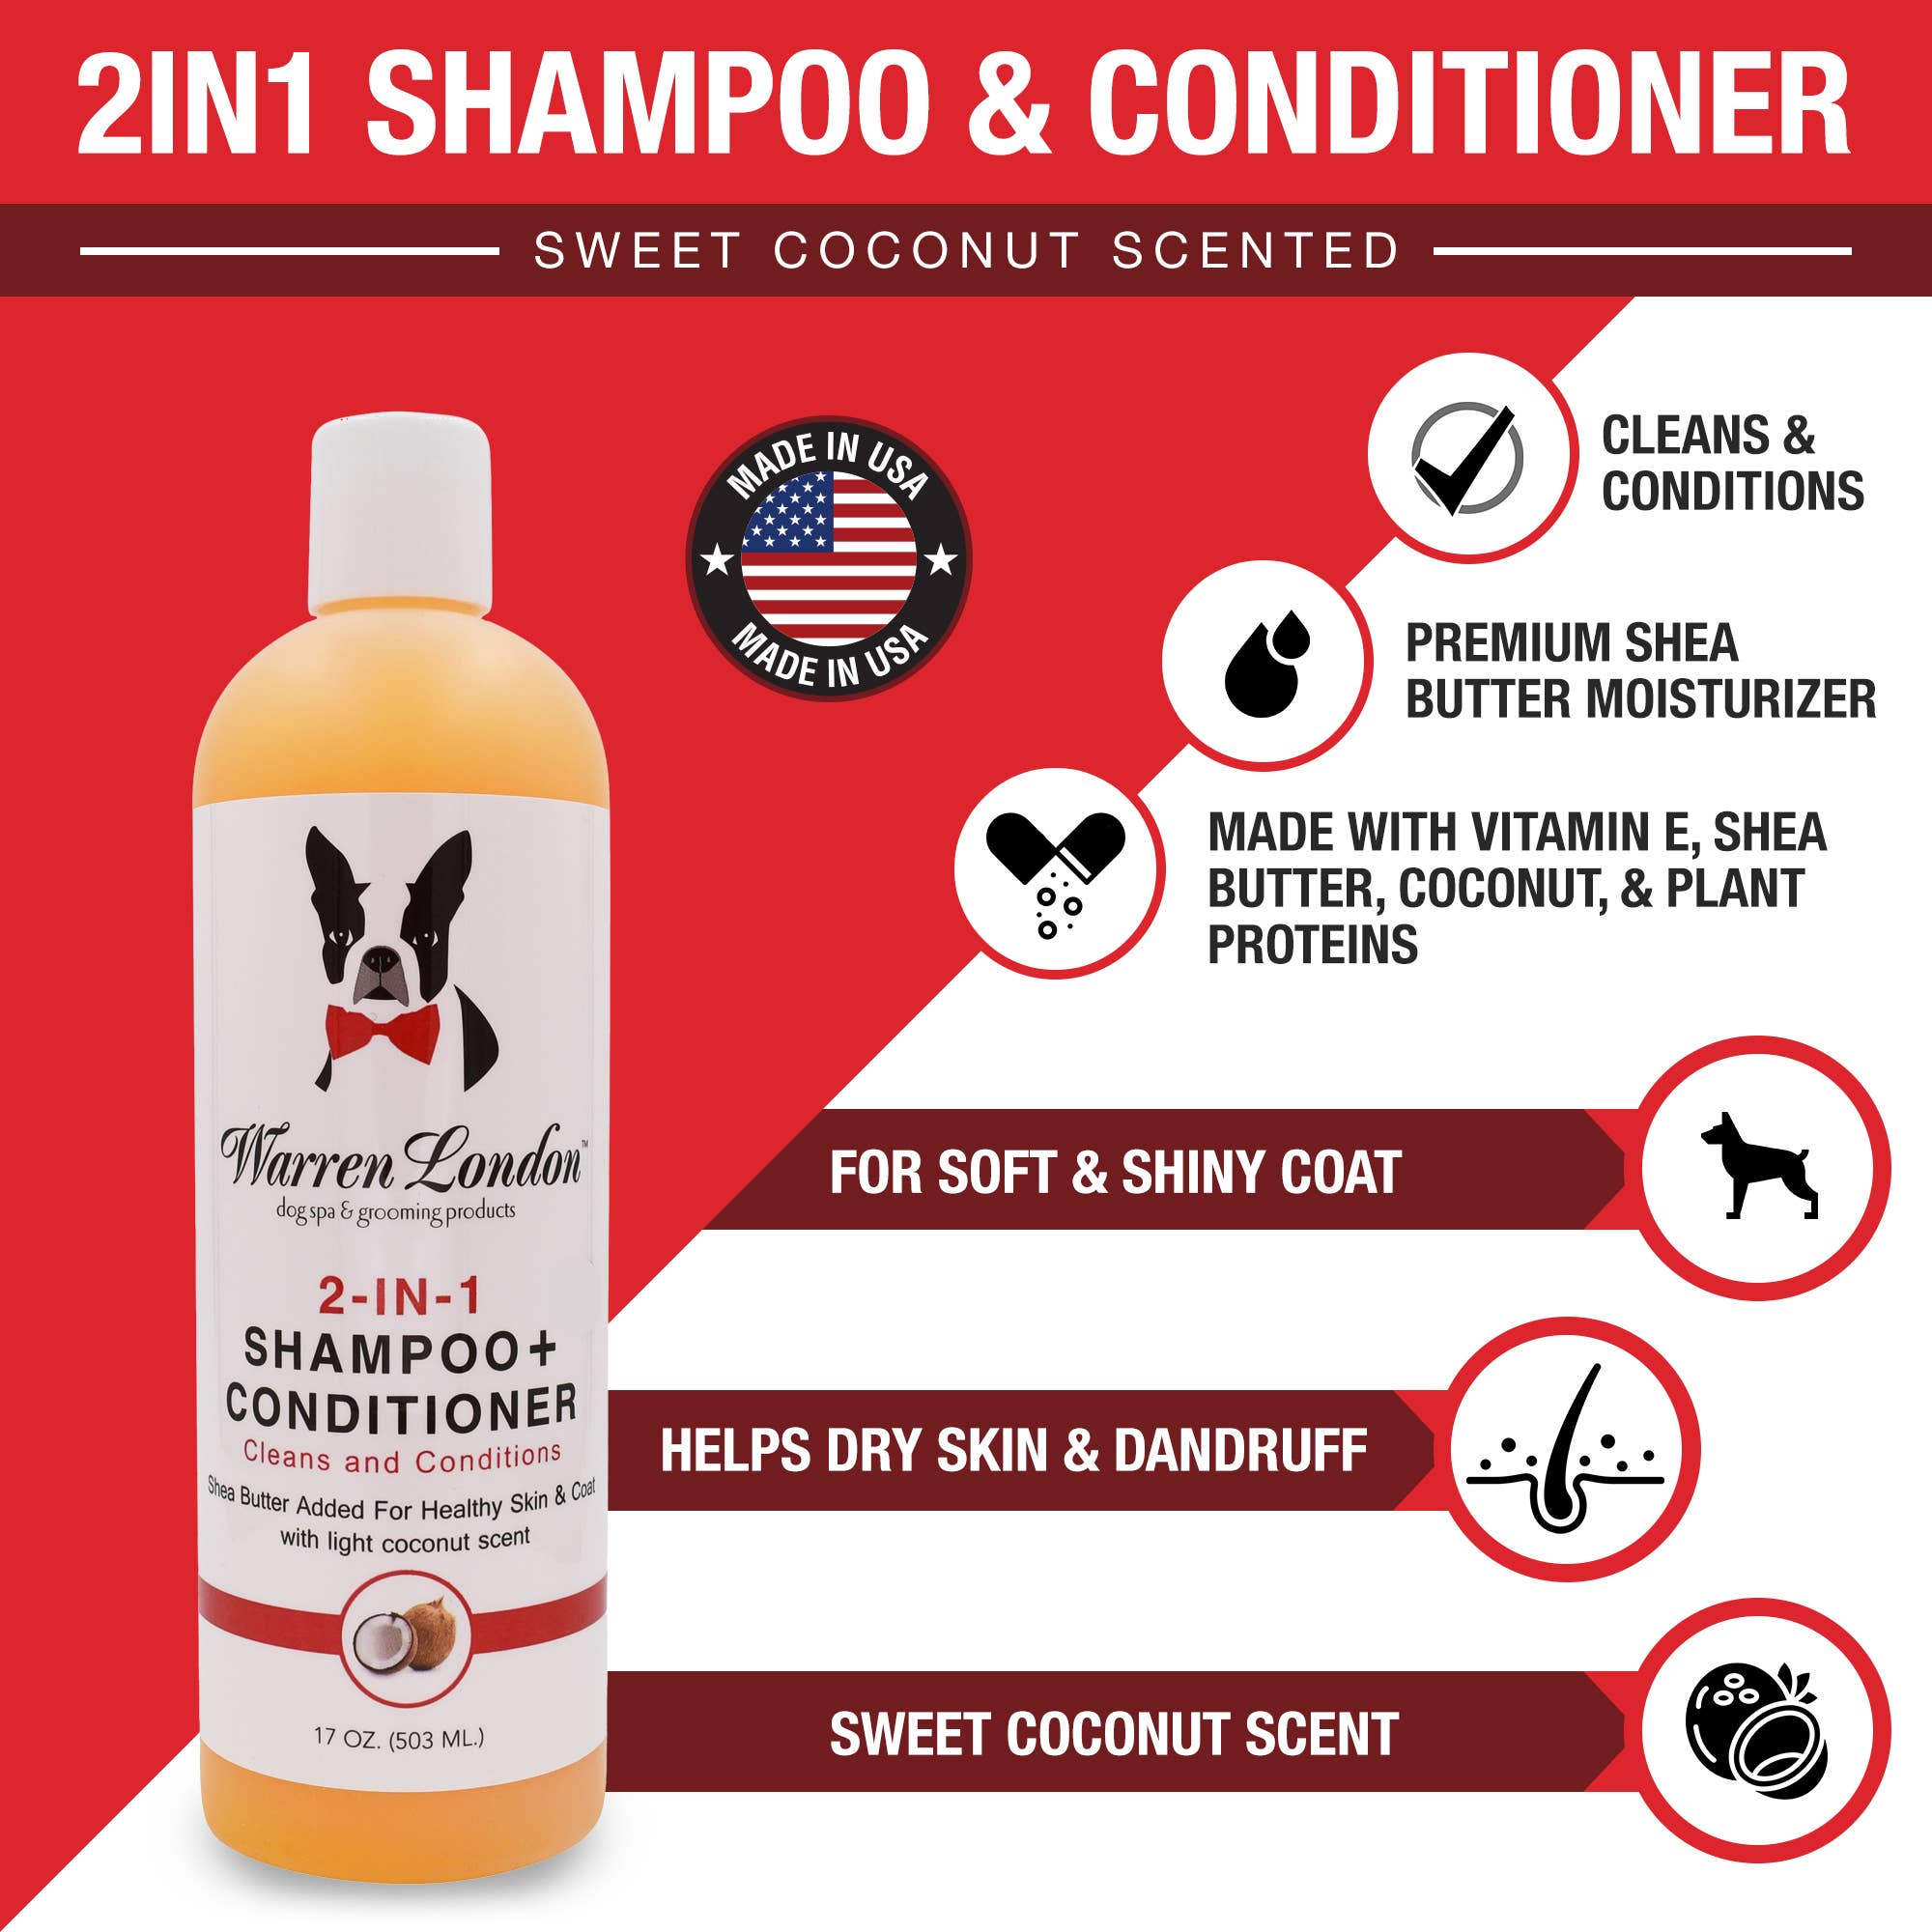 Warren London Dog Products - Shampoo: 2in1 plus Conditioner - 2 Sizes